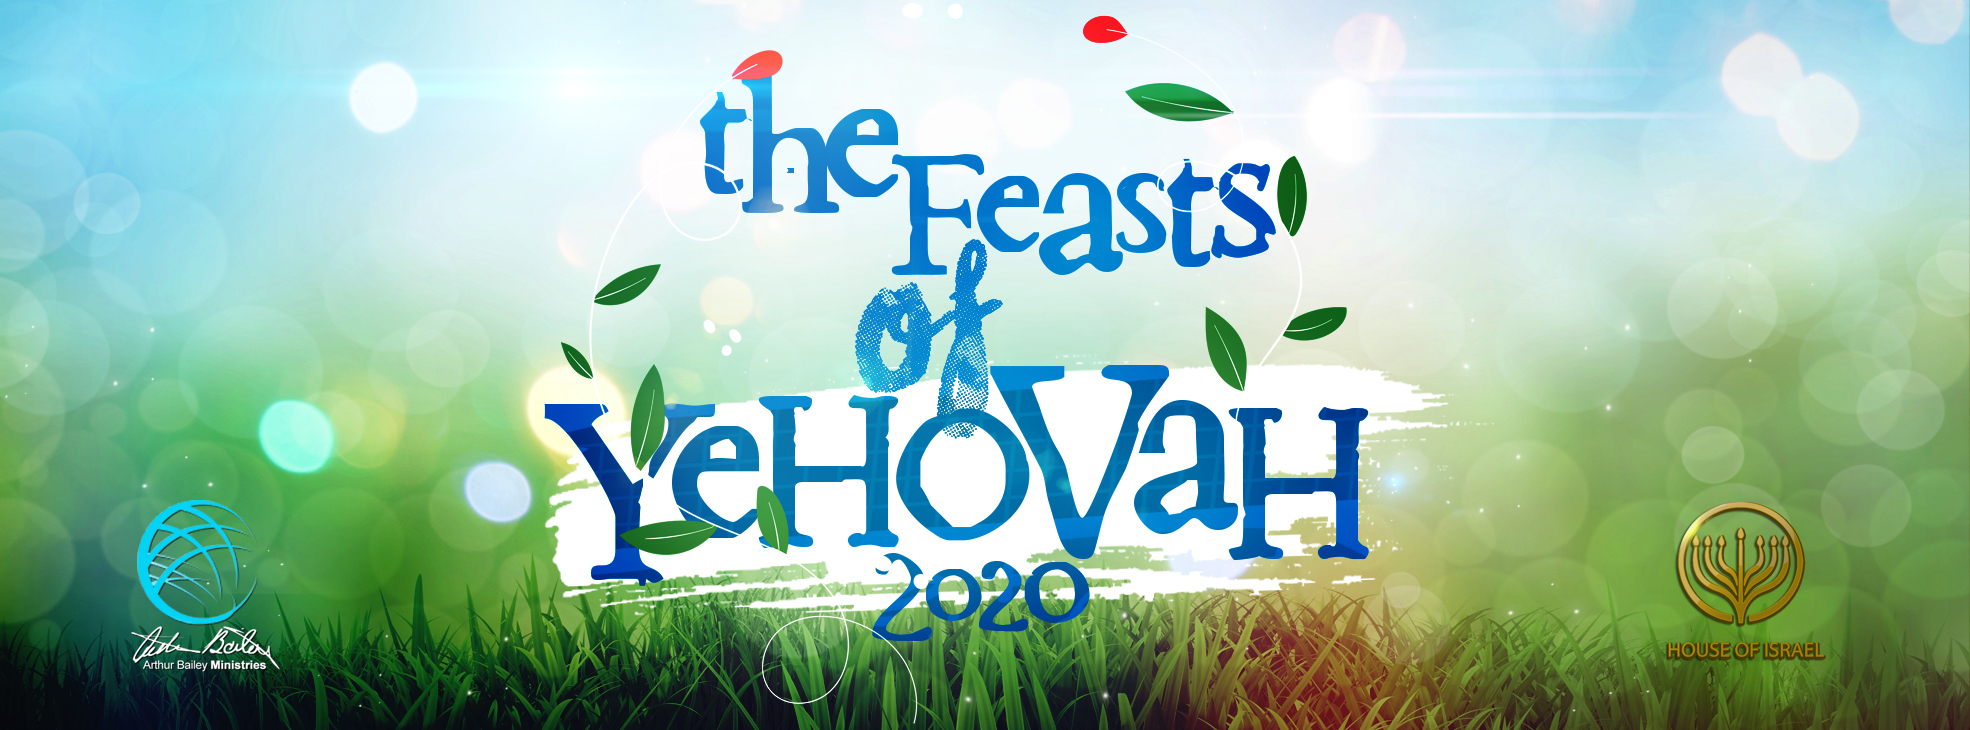 The Feasts of The Lord